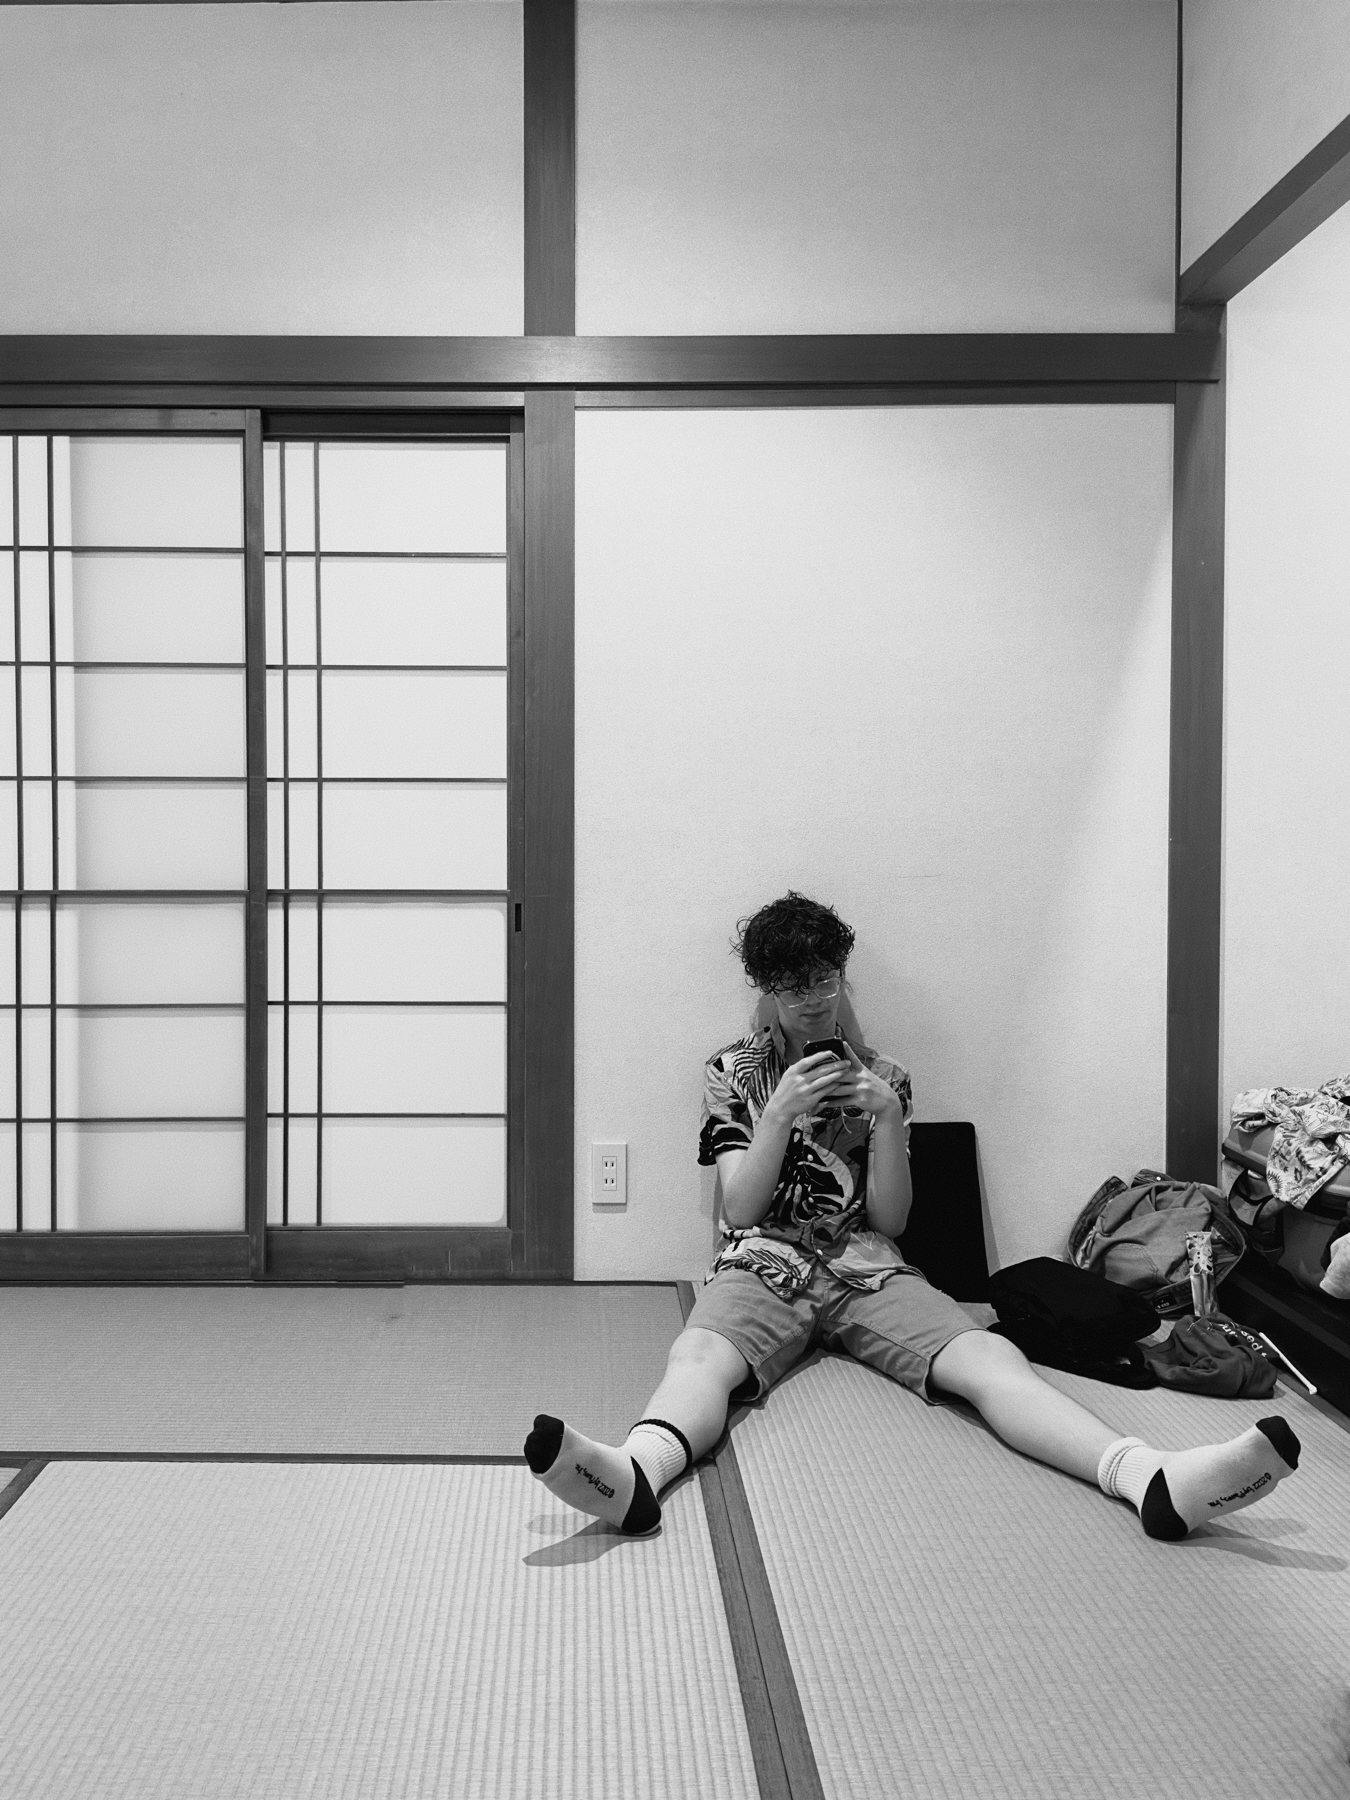 A person sits on tatami mats in a Japanese-style room, using a smartphone. There&rsquo;s a shoji sliding door to the side and belongings scattered next to the individual. The image is in black and white.